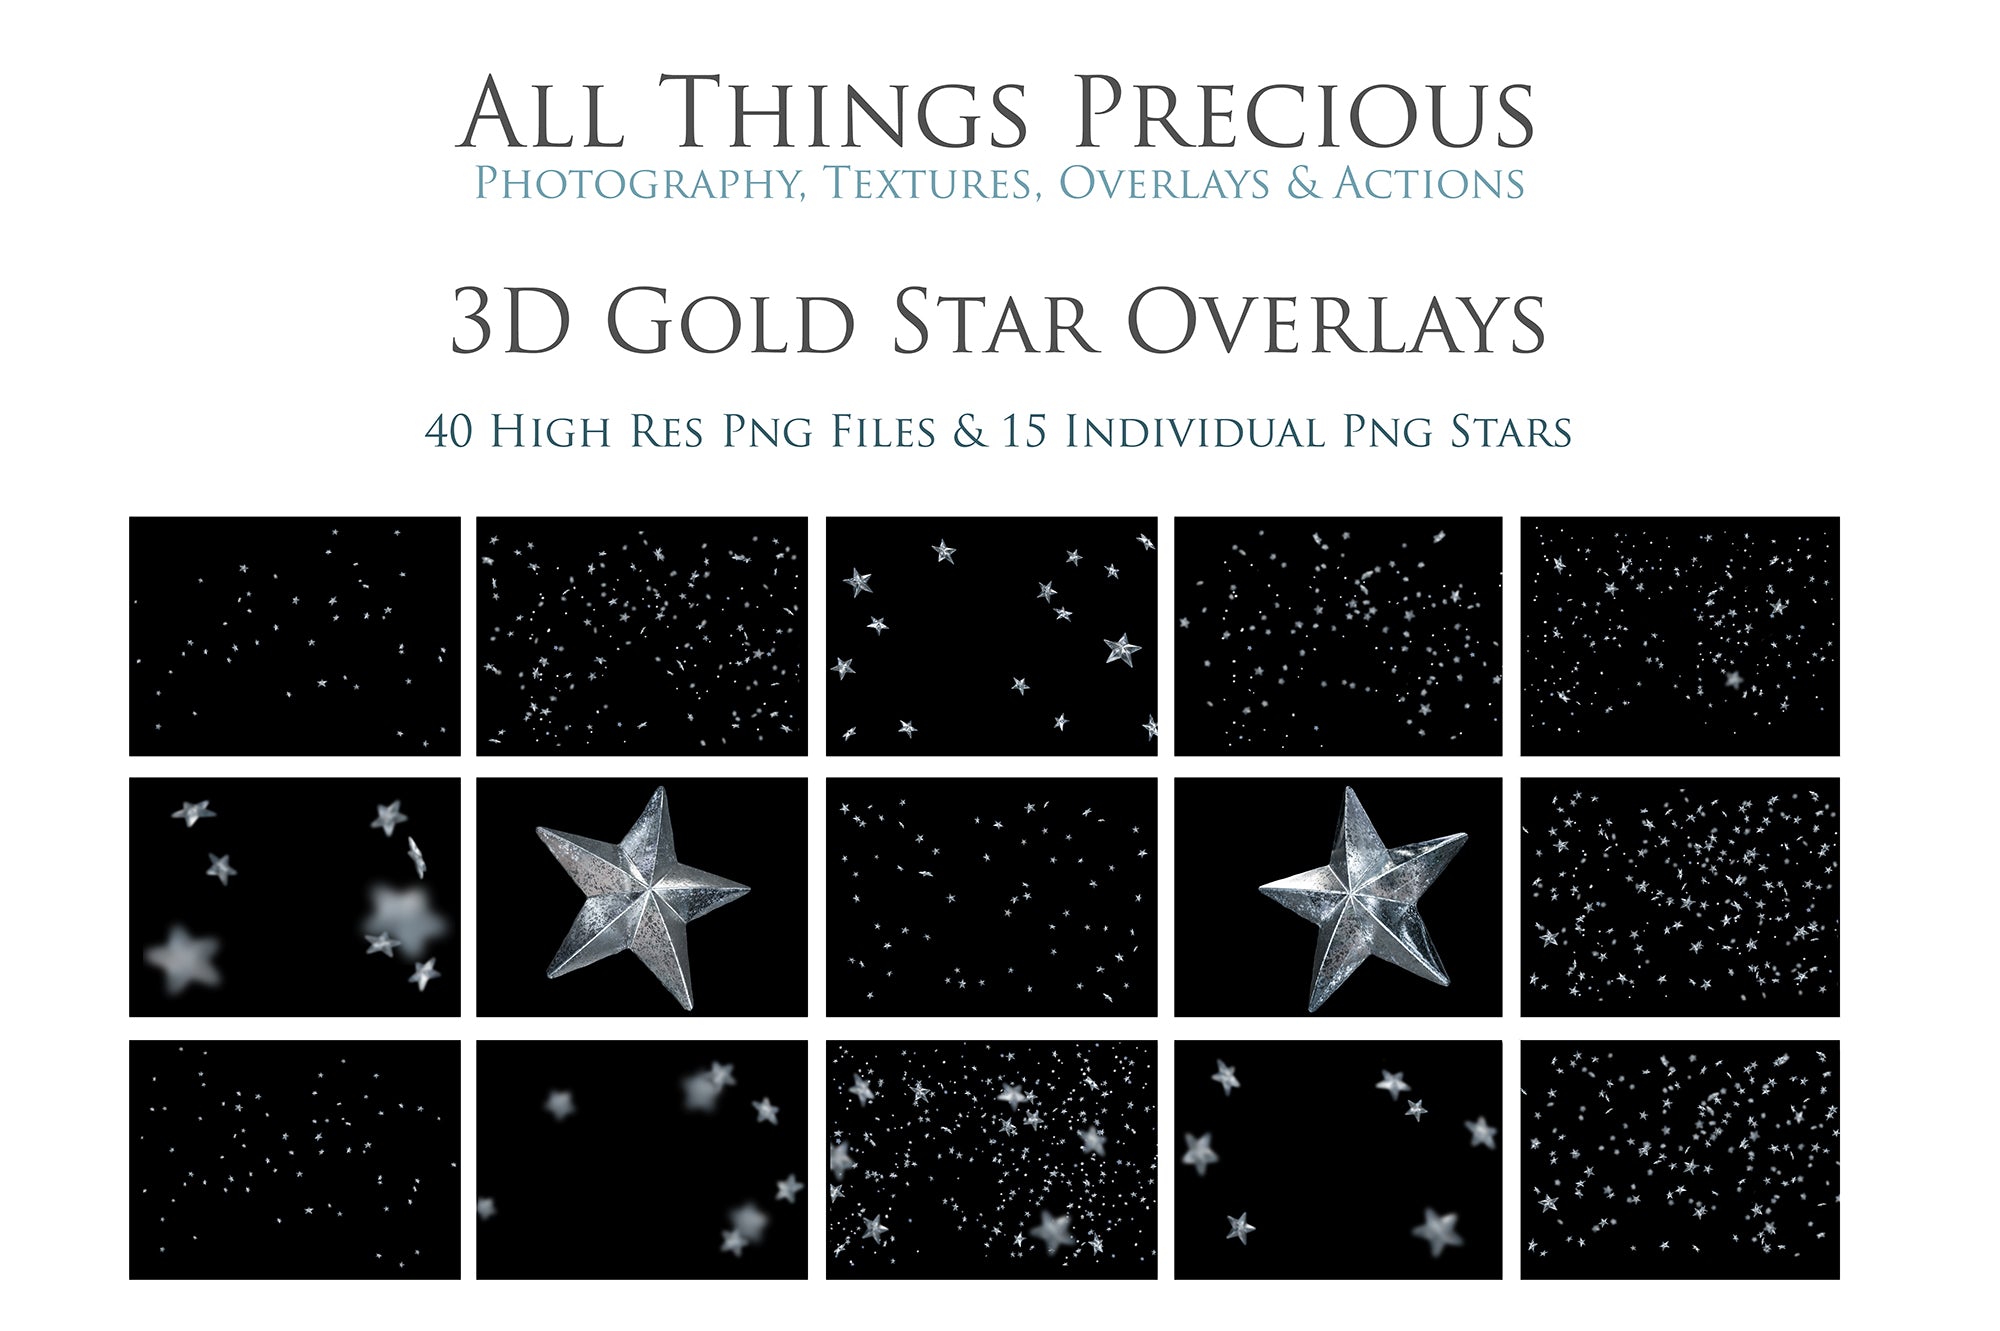 Png overlays for photography, Star clipart, Gold Star Clipart, Png christmas season. Photoshop, Digital scrapbooking. Transparent, high resolution files for photographers. These are gorgeous PNG overlays for fantasy digital art, Child portraiture. Colourful, Gold, Silver. Digital download. Graphic effects. ATP Textures